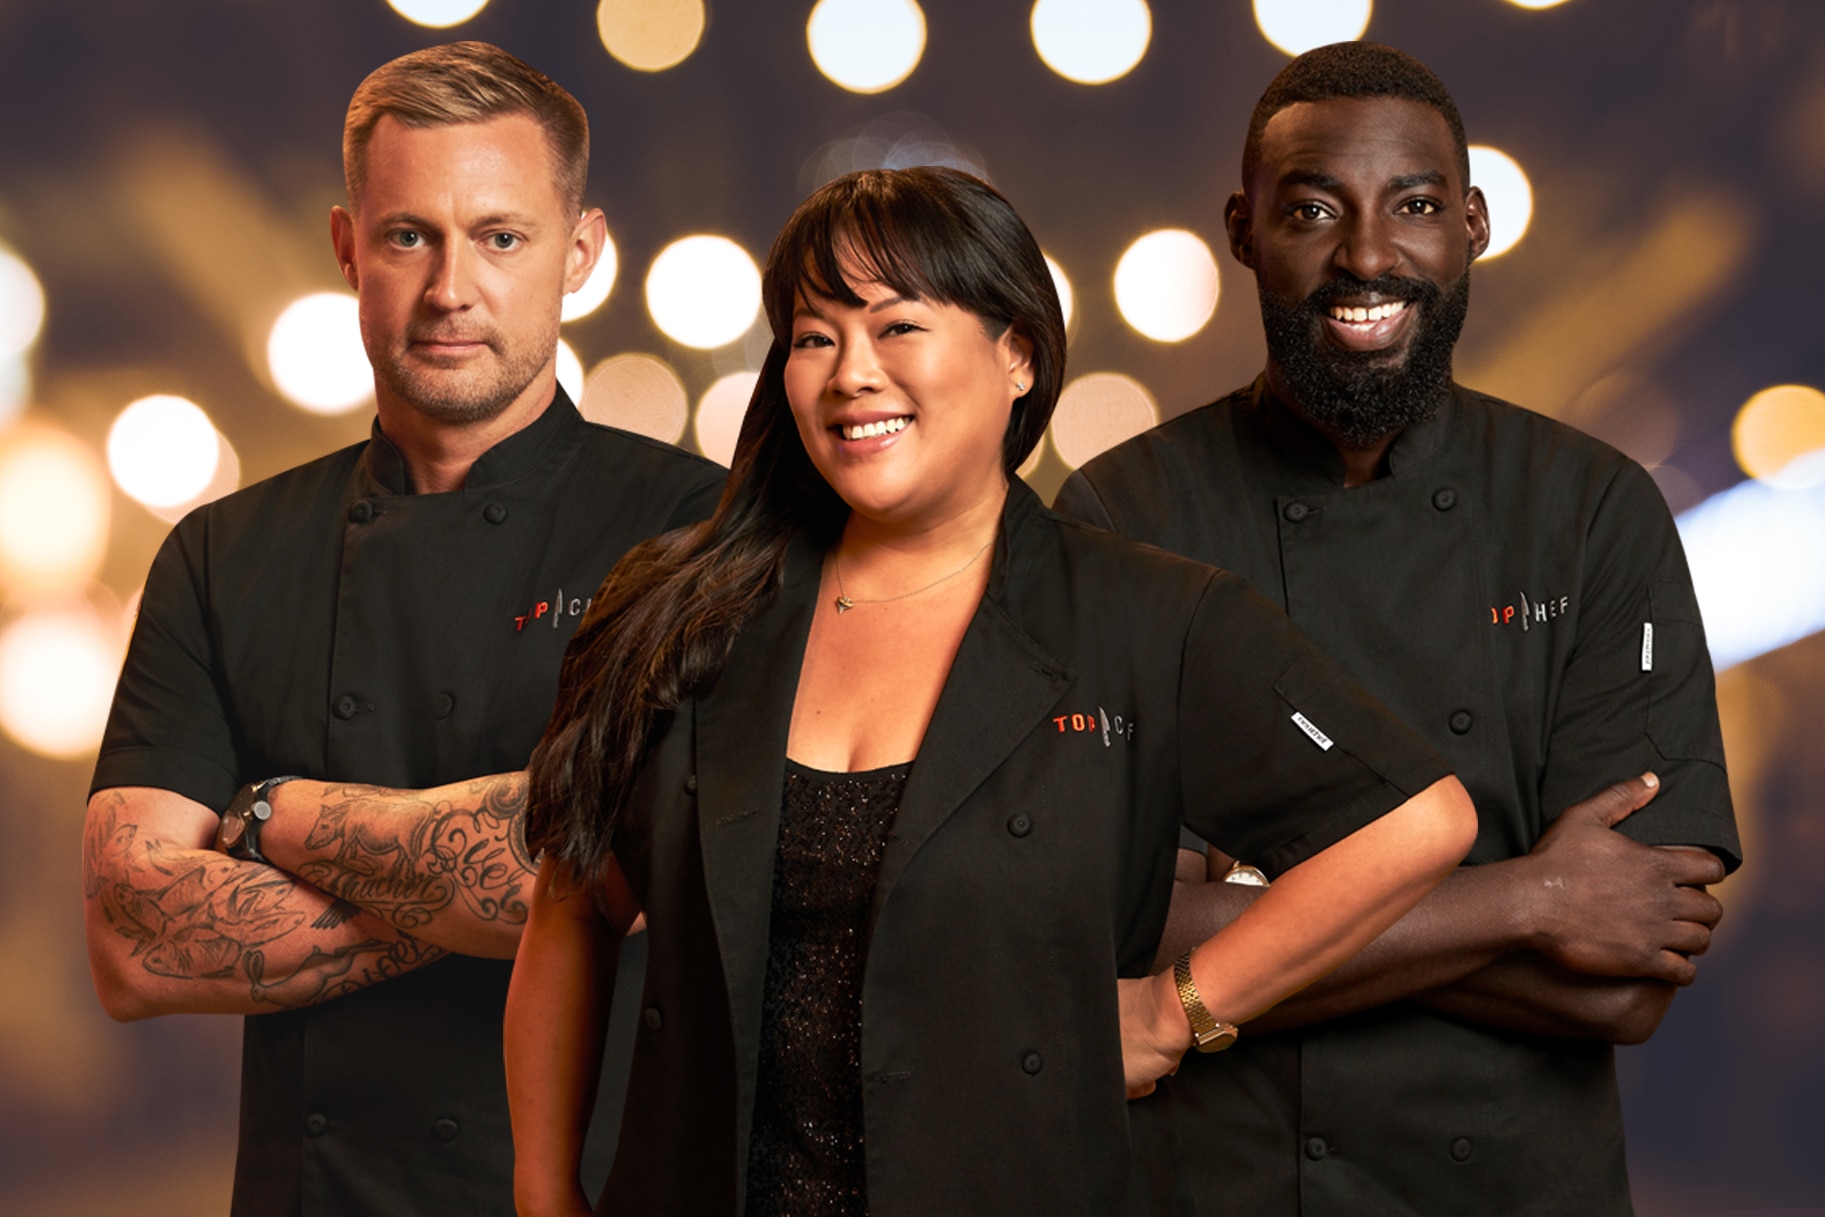 Top Chef Season Where Are They Now? | Chef